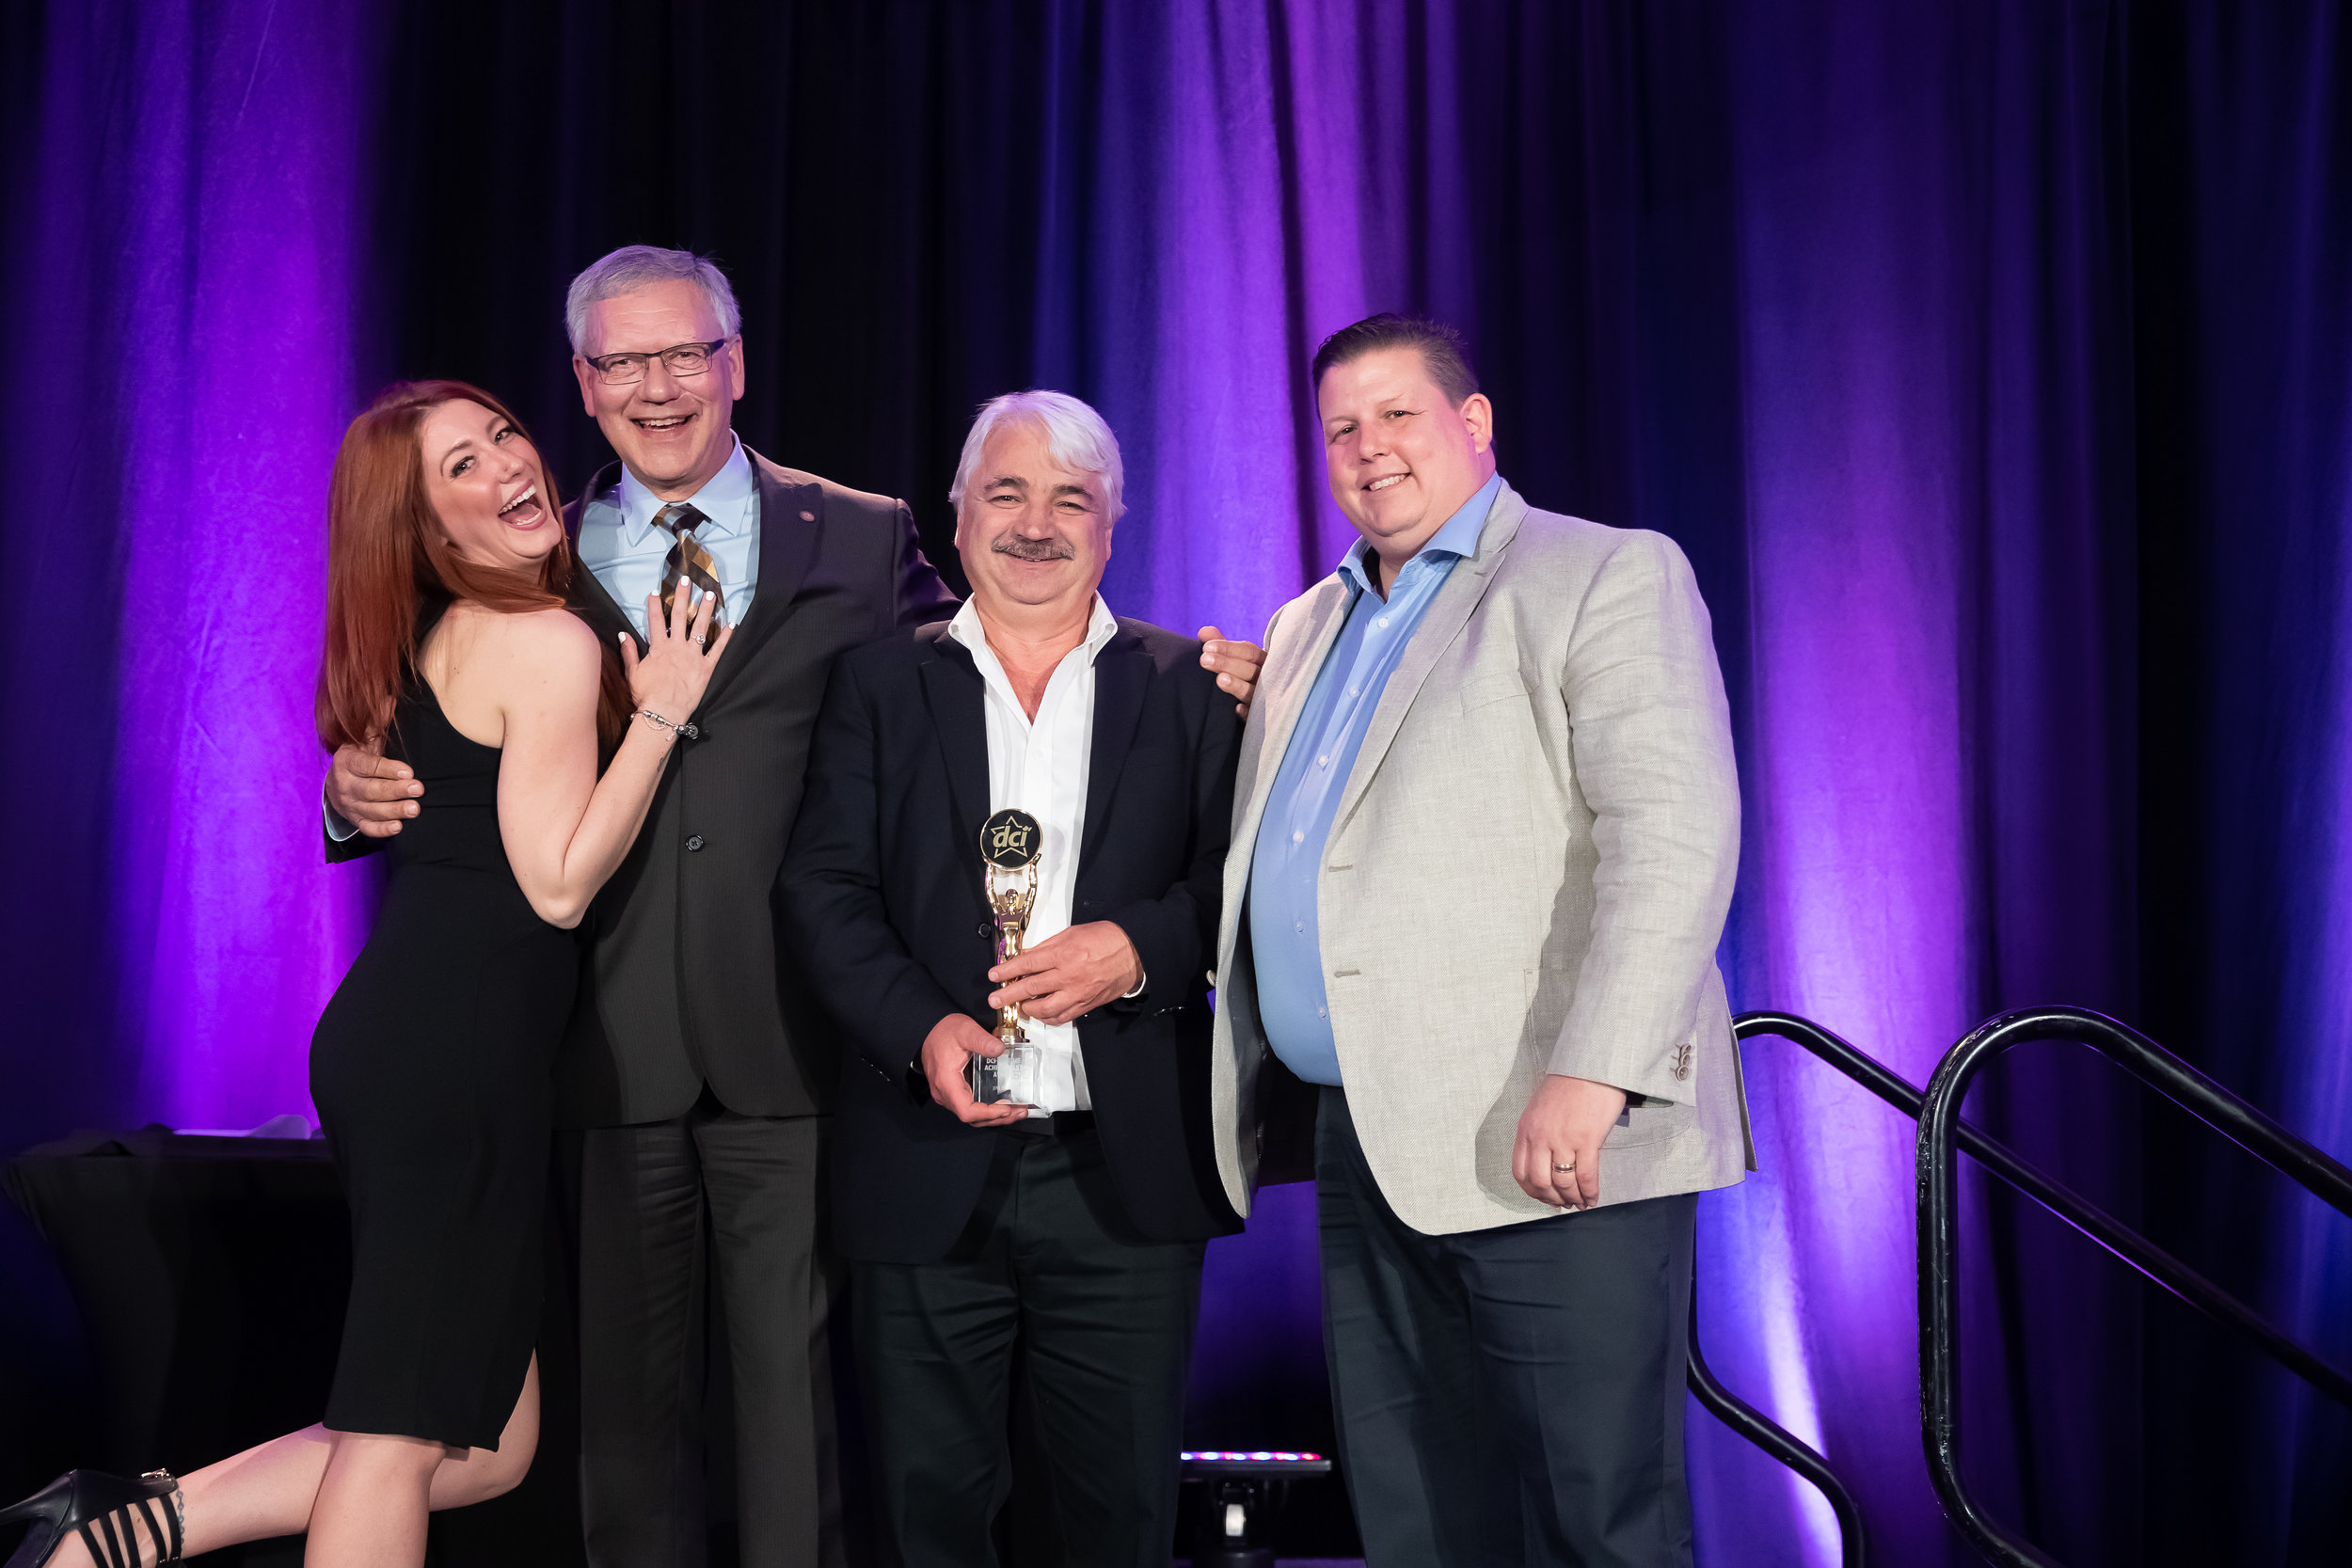 Star Awards Presenter Melissa Lynne-Schaffer, DCI Past Chair Dave Powell of Atlantic Grocery Distributors, Jim Bexis of Sun Valley Market and Barry Lanteigne of DCI